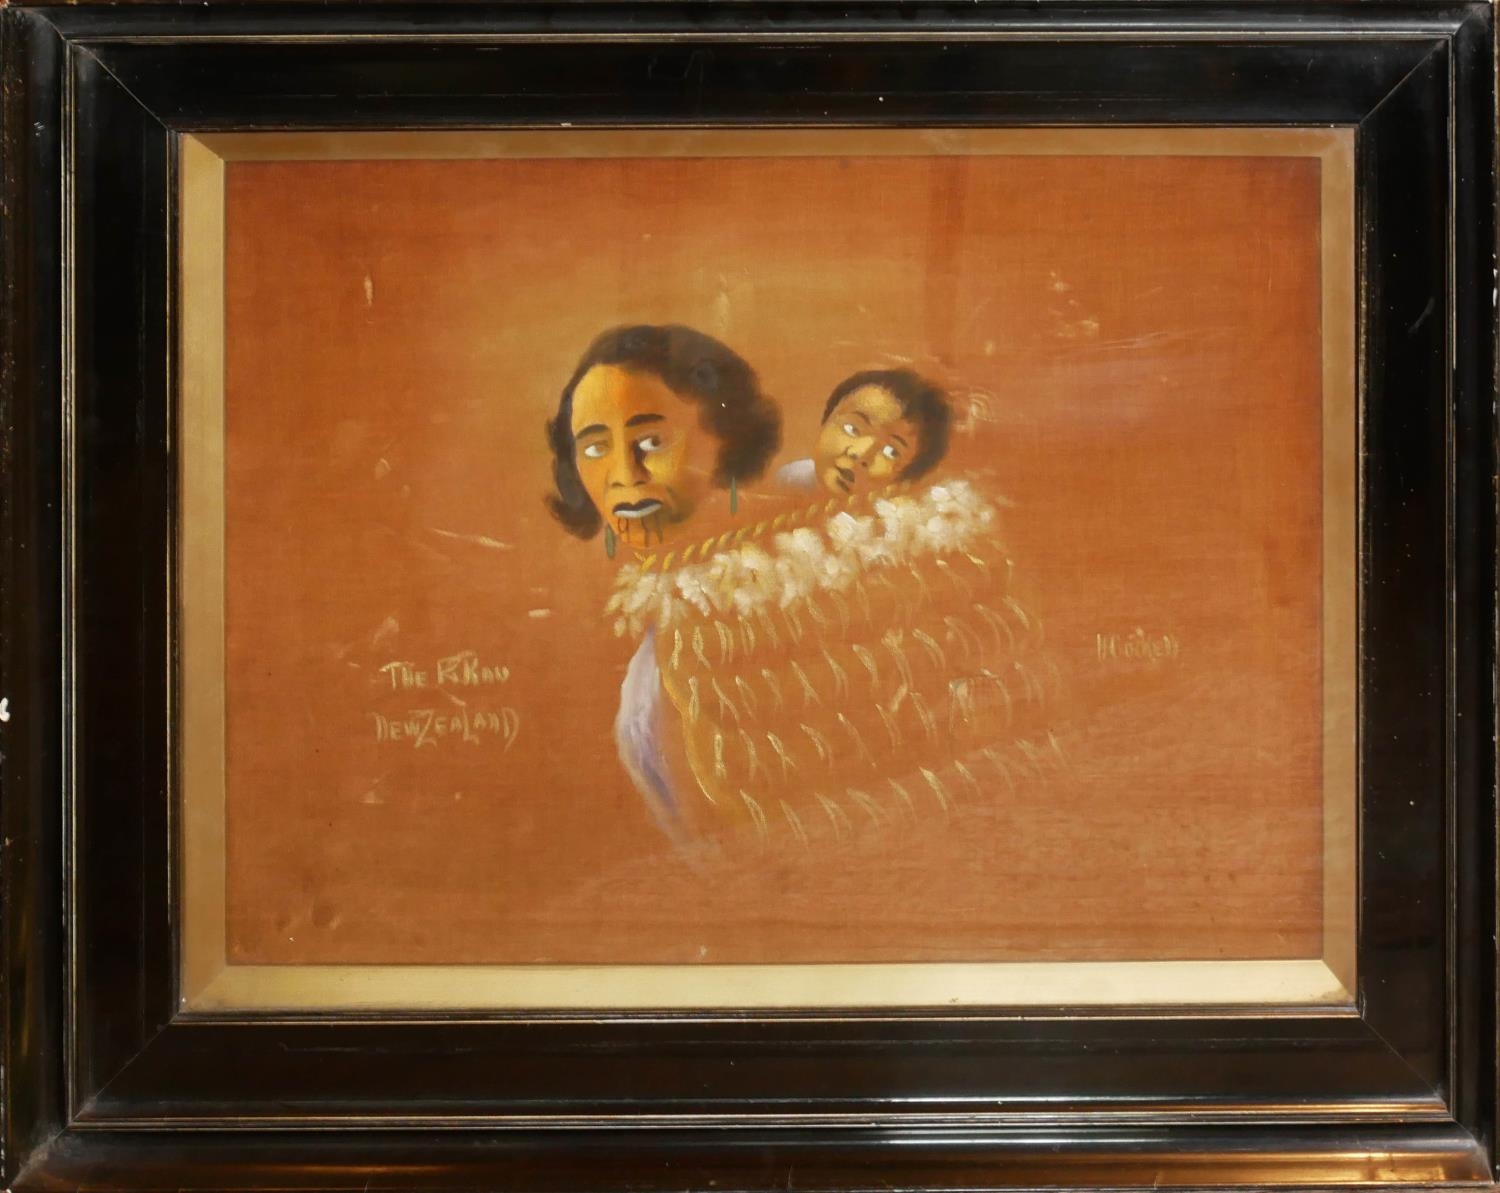 H. COCKELL, A 19TH/20TH CENTURY NEW ZEALAND MAORI SCHOOL OIL ON THIN BROWN CANVAS, PORTRAIT OF A - Image 2 of 7